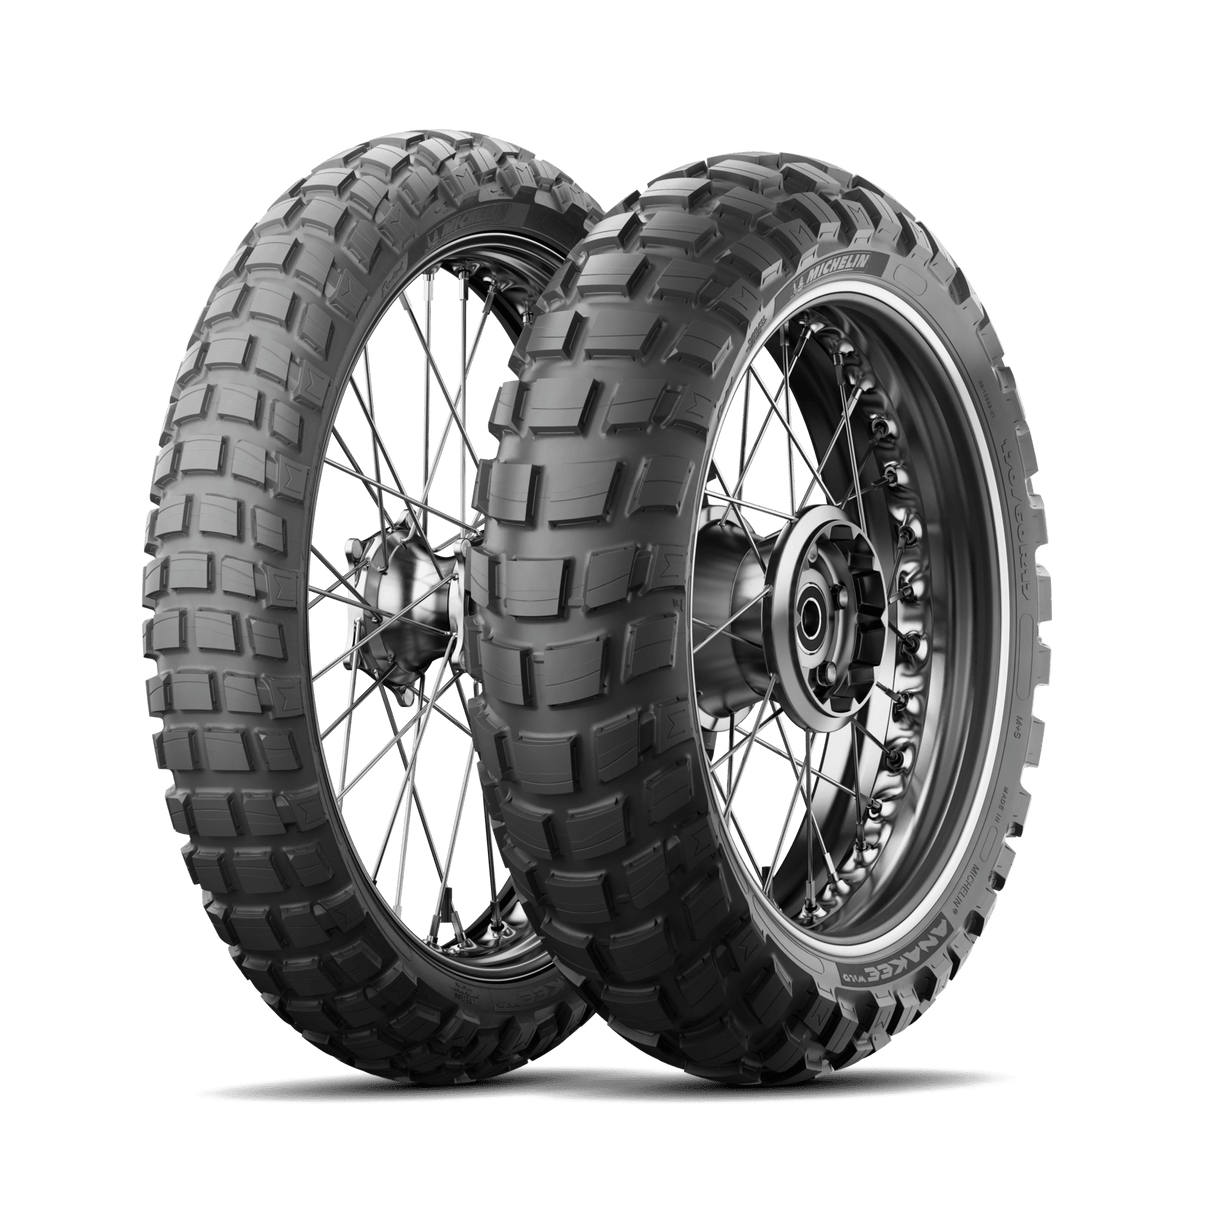 Michelin Anakee Wild 110/80 R19 59R Front Tyre